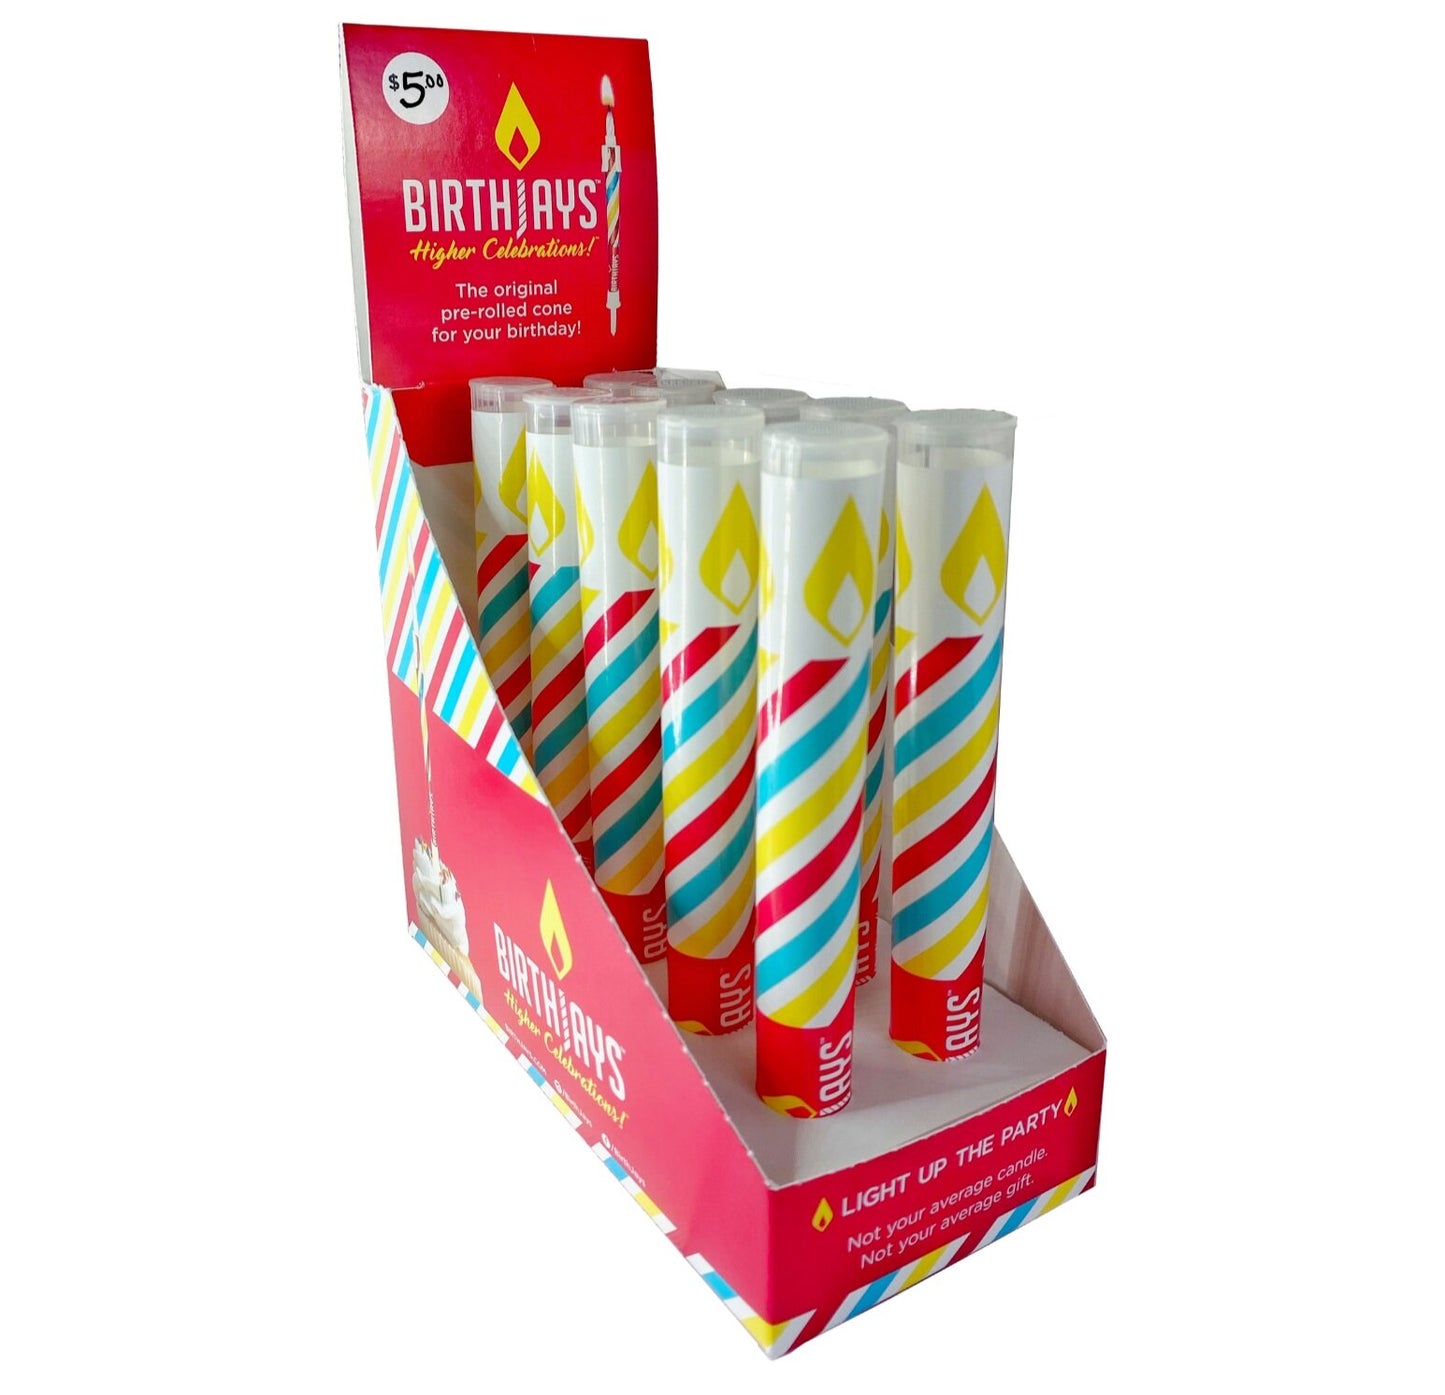 BIRTHJAYS | Joint Birthday Candle Cones | Available in 5 Pack & 10 Pack